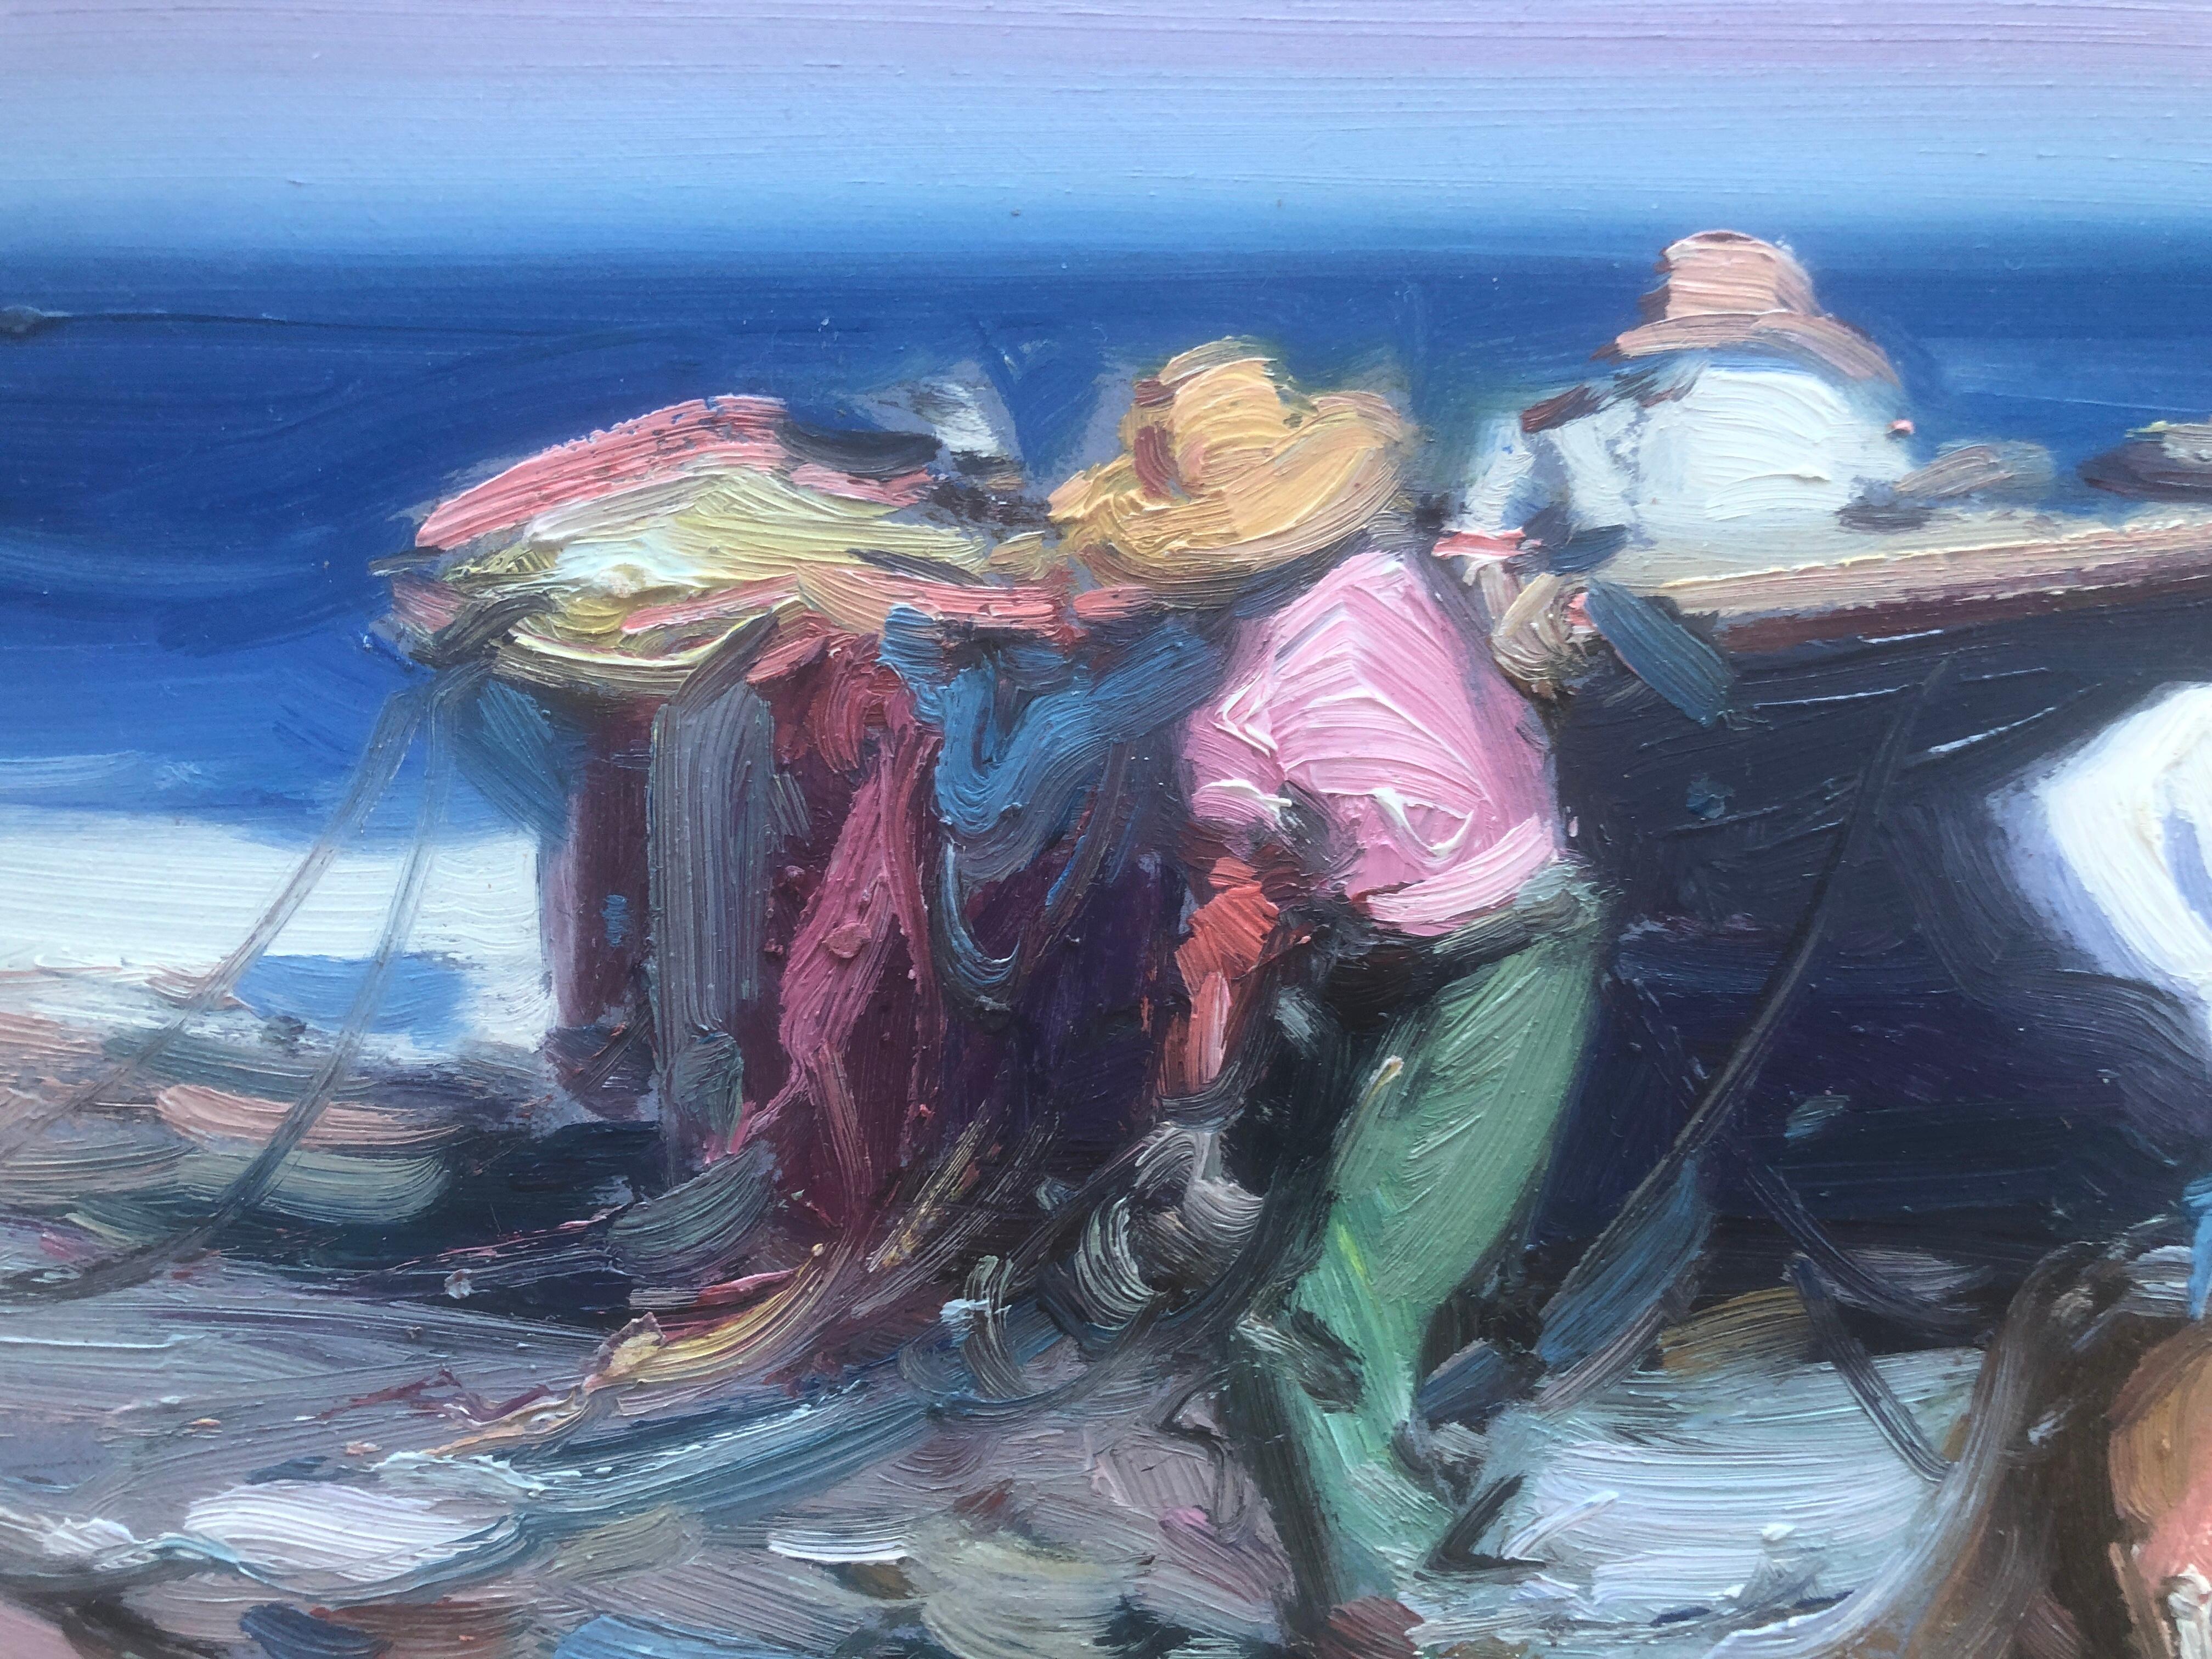 Spanish fishermen on the beach Spain oil on board painting - Post-Impressionist Painting by Gabriel Casarrubios